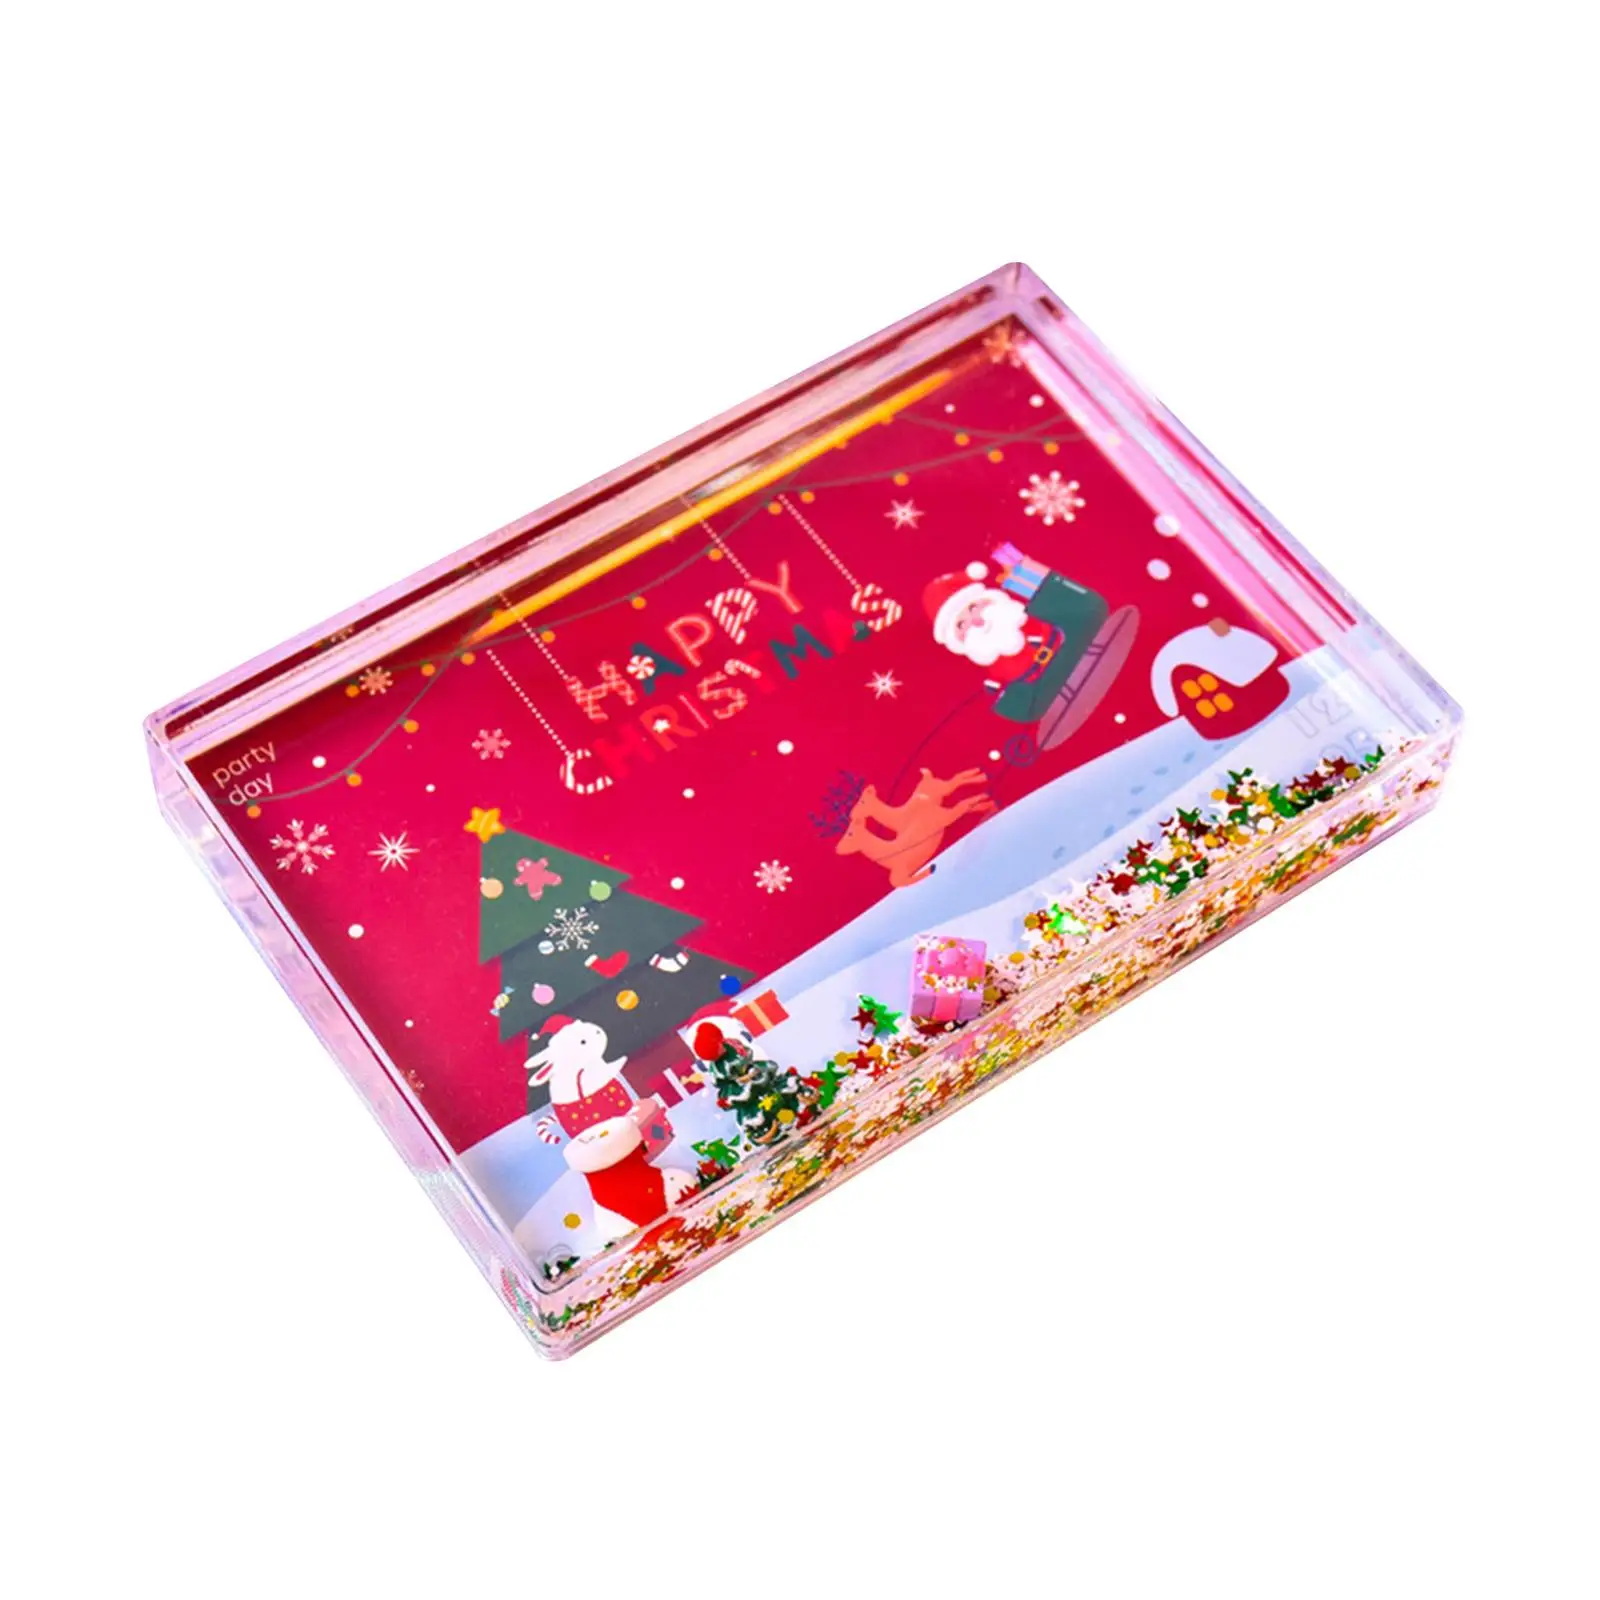 Christmas Photo Frame Card Display Desk Xmas Office Quicksand Picture Frame